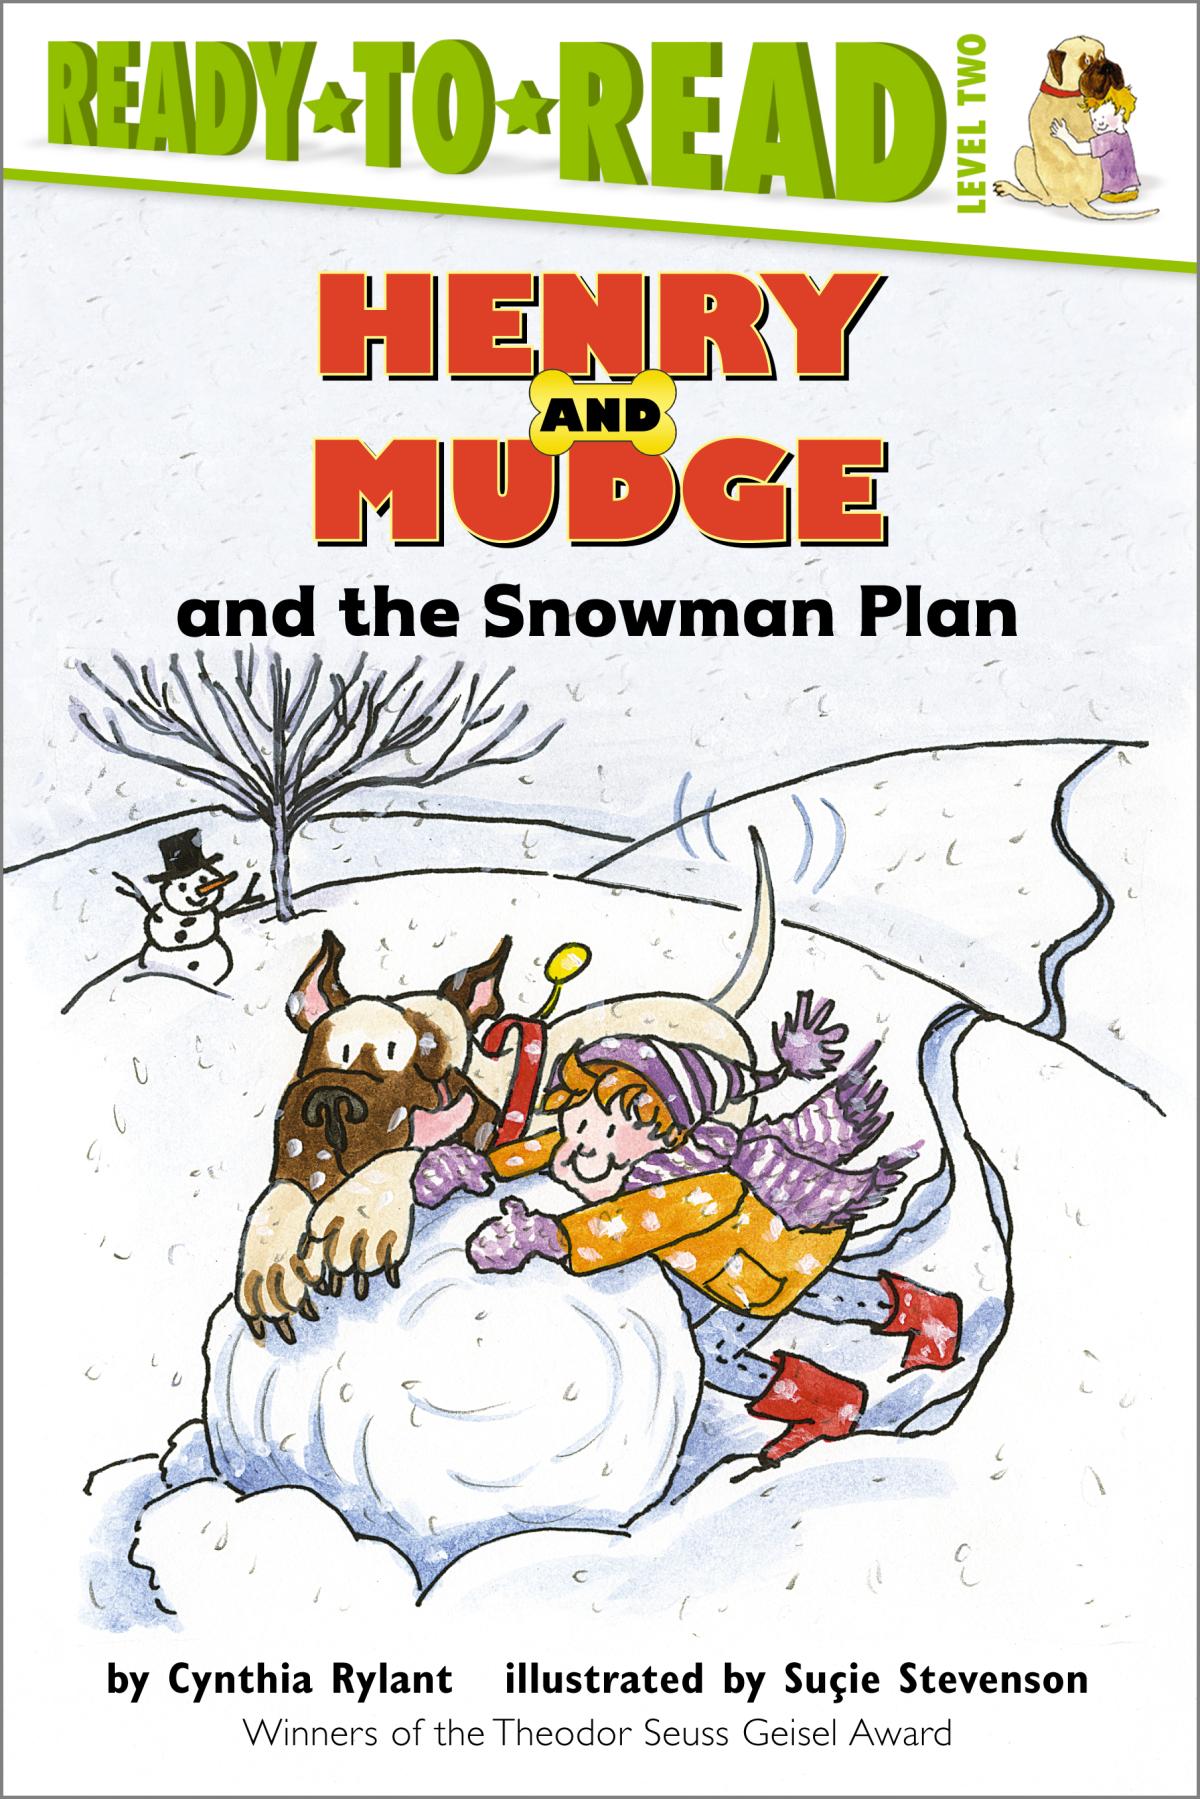 Book cover of Henry and Mudge and the Snowman Plan by Cynthia Rylant.